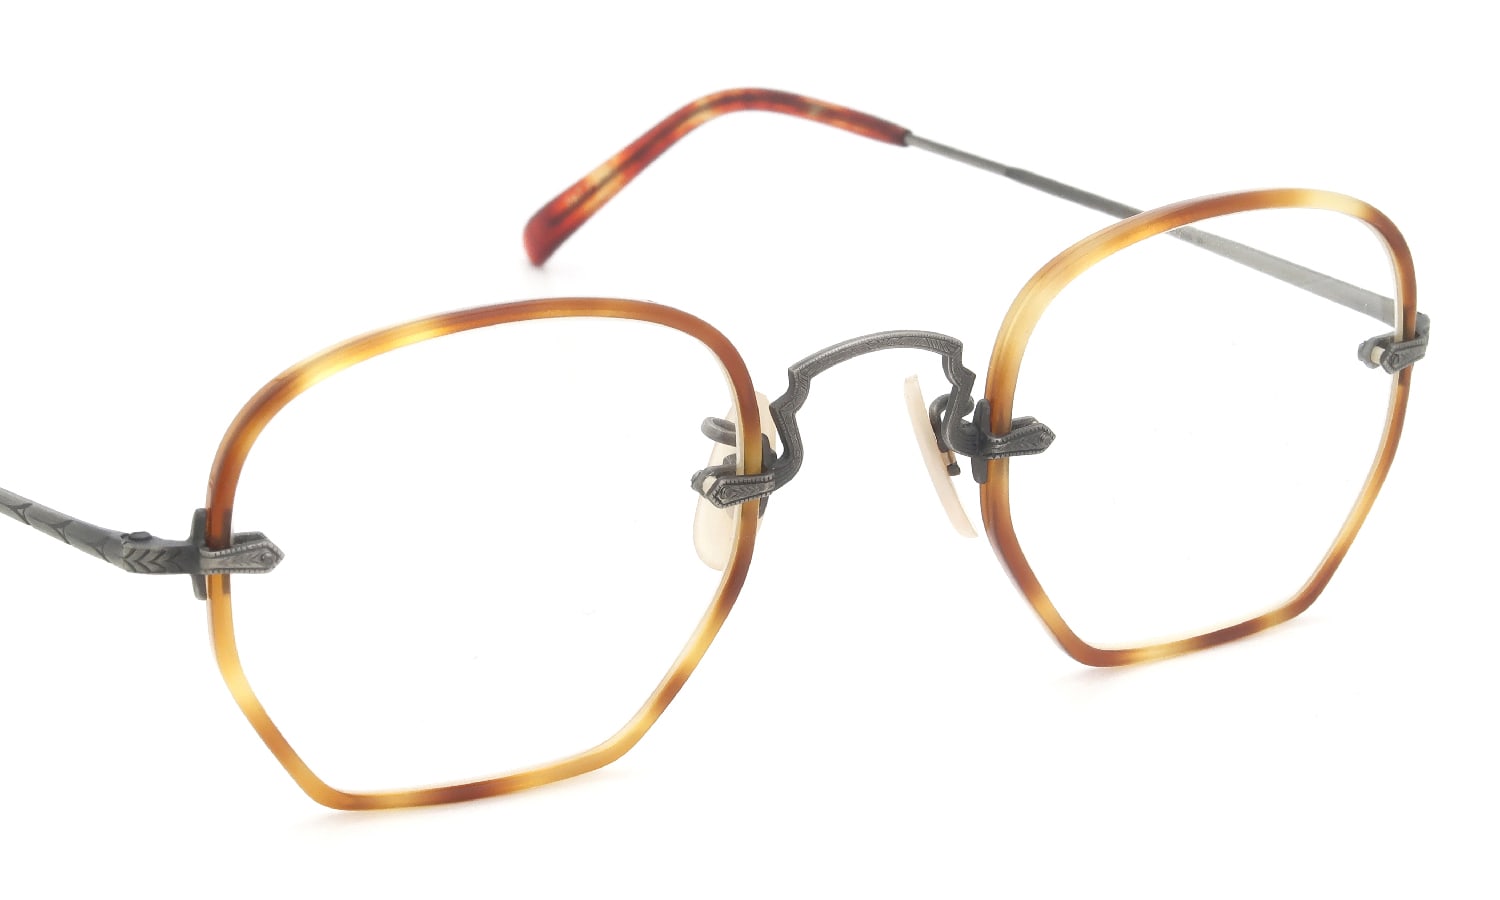 OLIVER PEOPLES 1990's OP-19A P